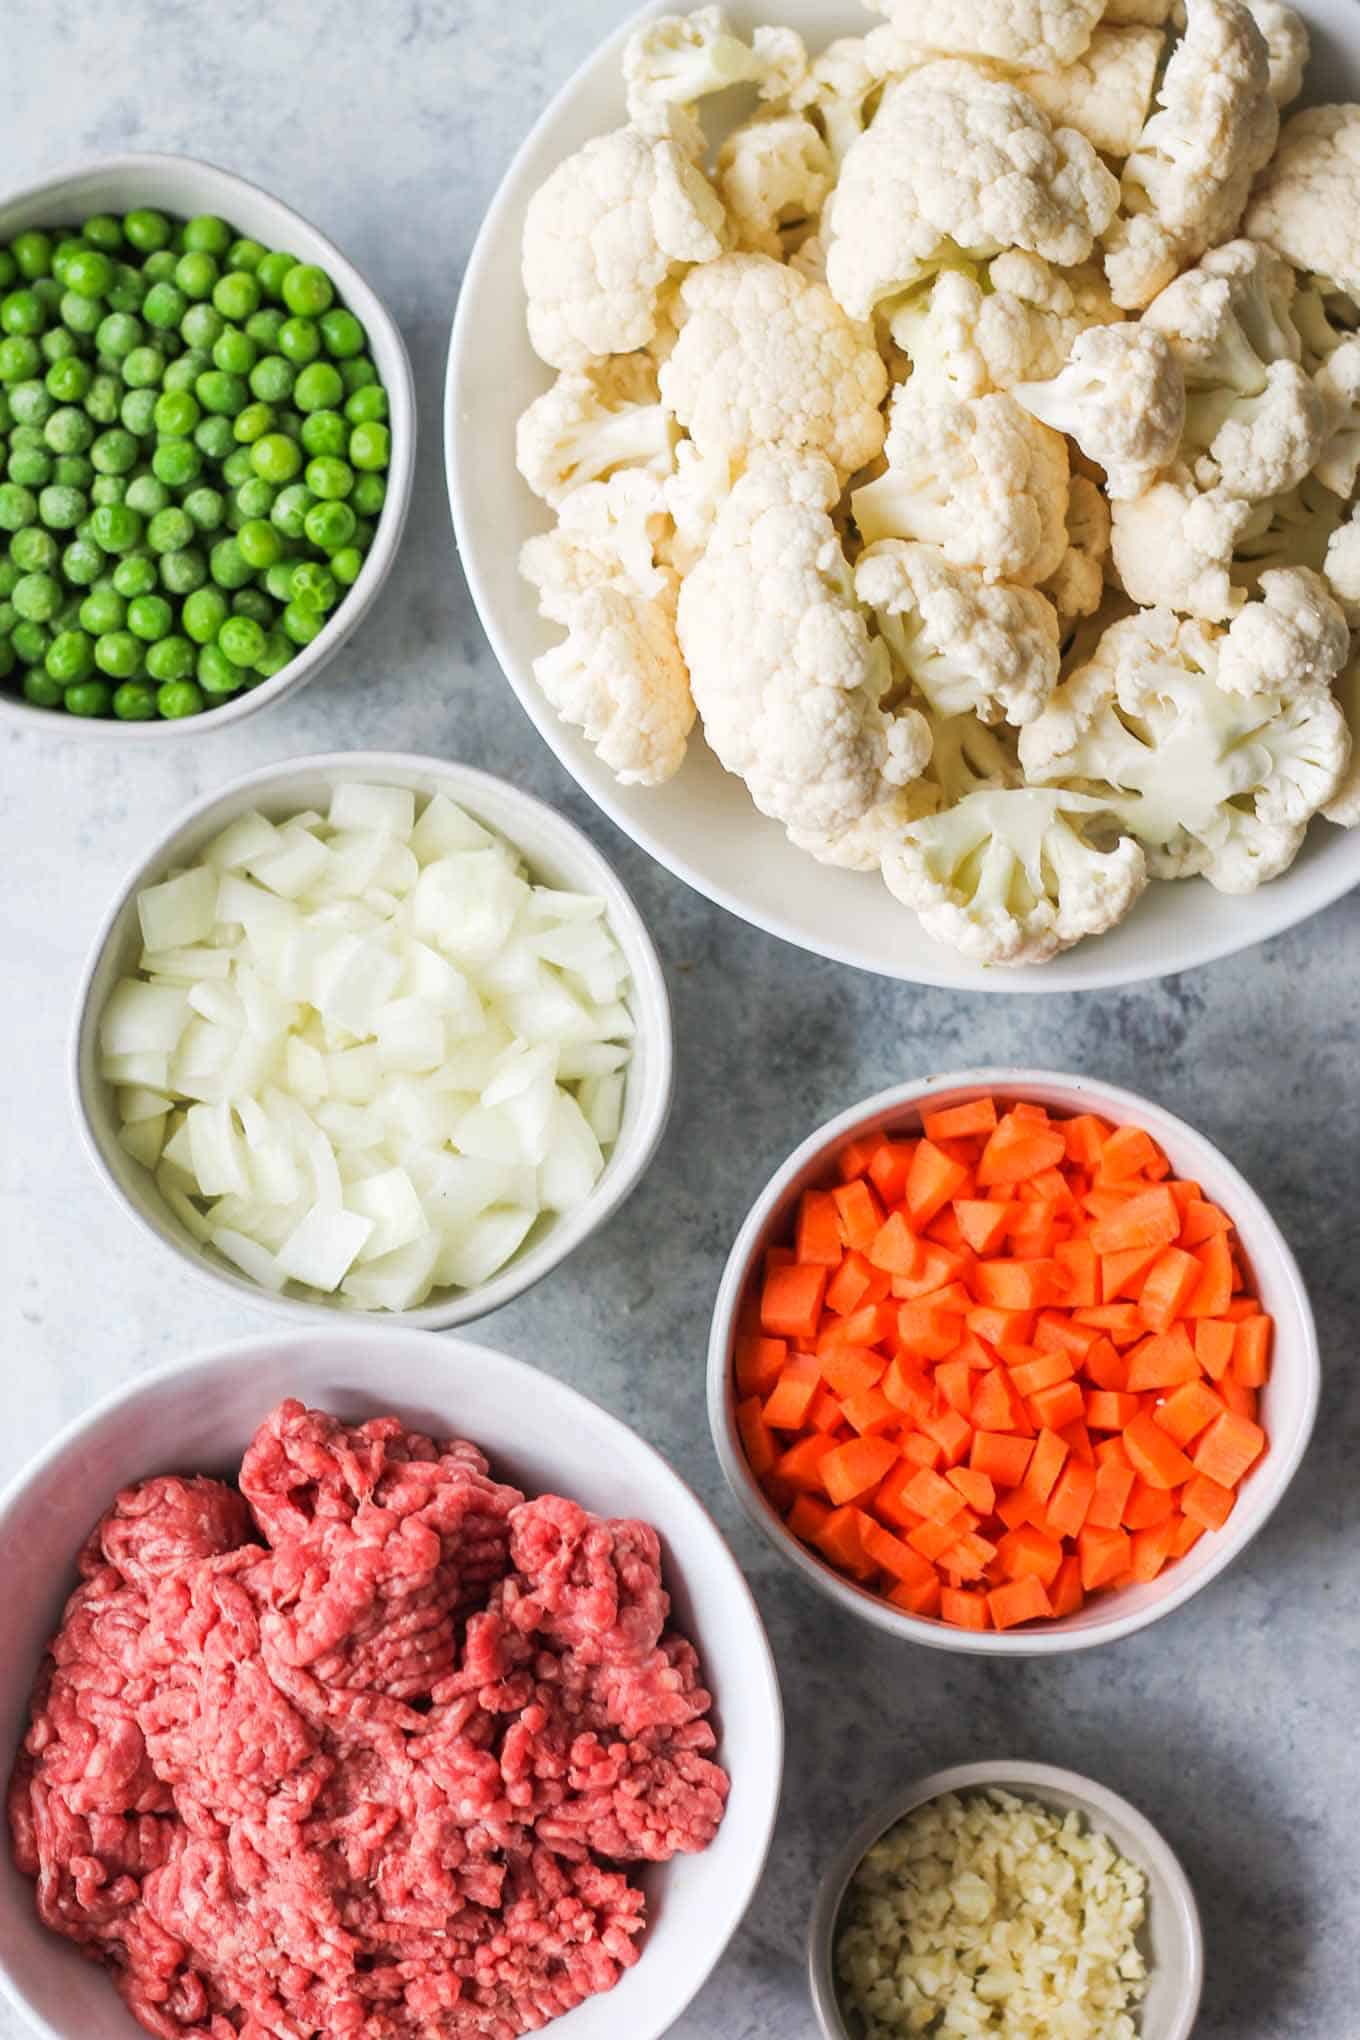 The shepherd's pie ingredients separated into bowls before cooking.